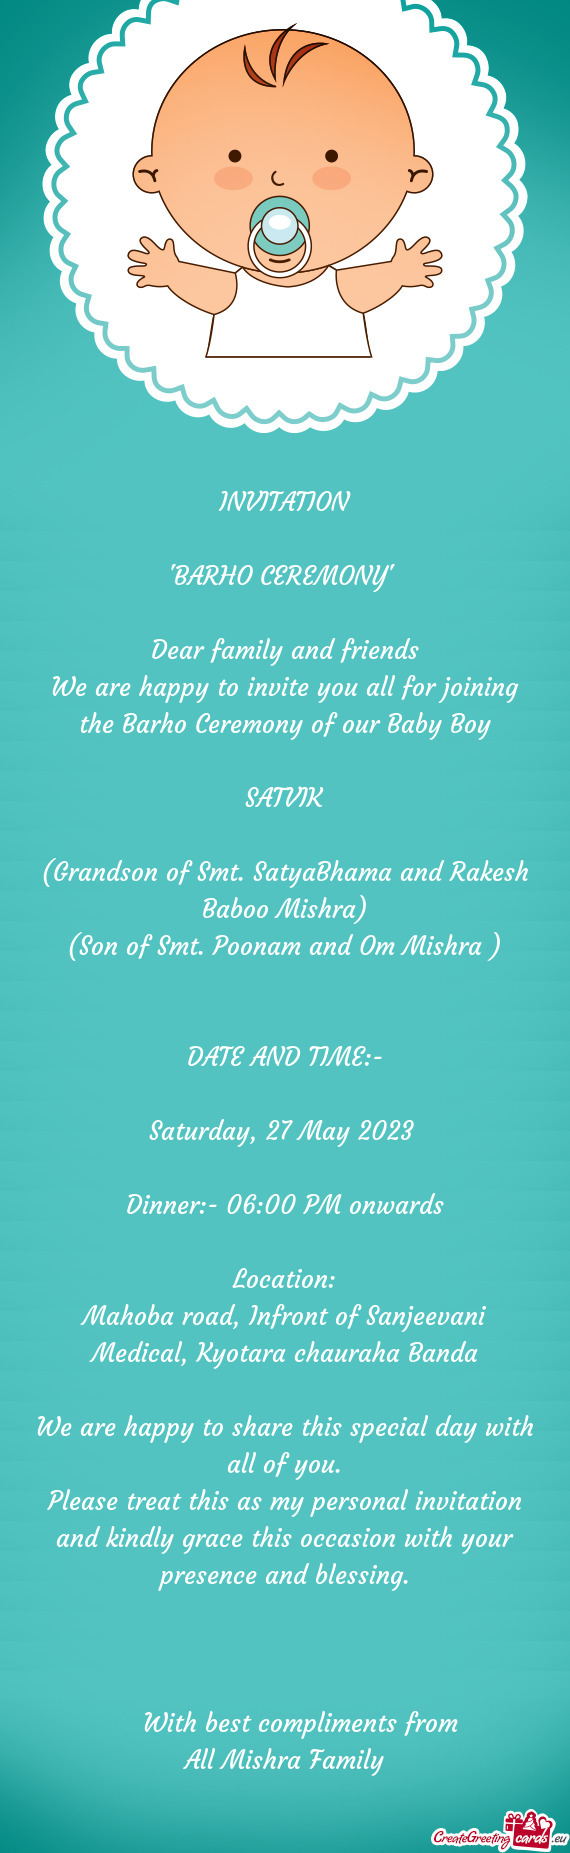 We are happy to invite you all for joining the Barho Ceremony of our Baby Boy